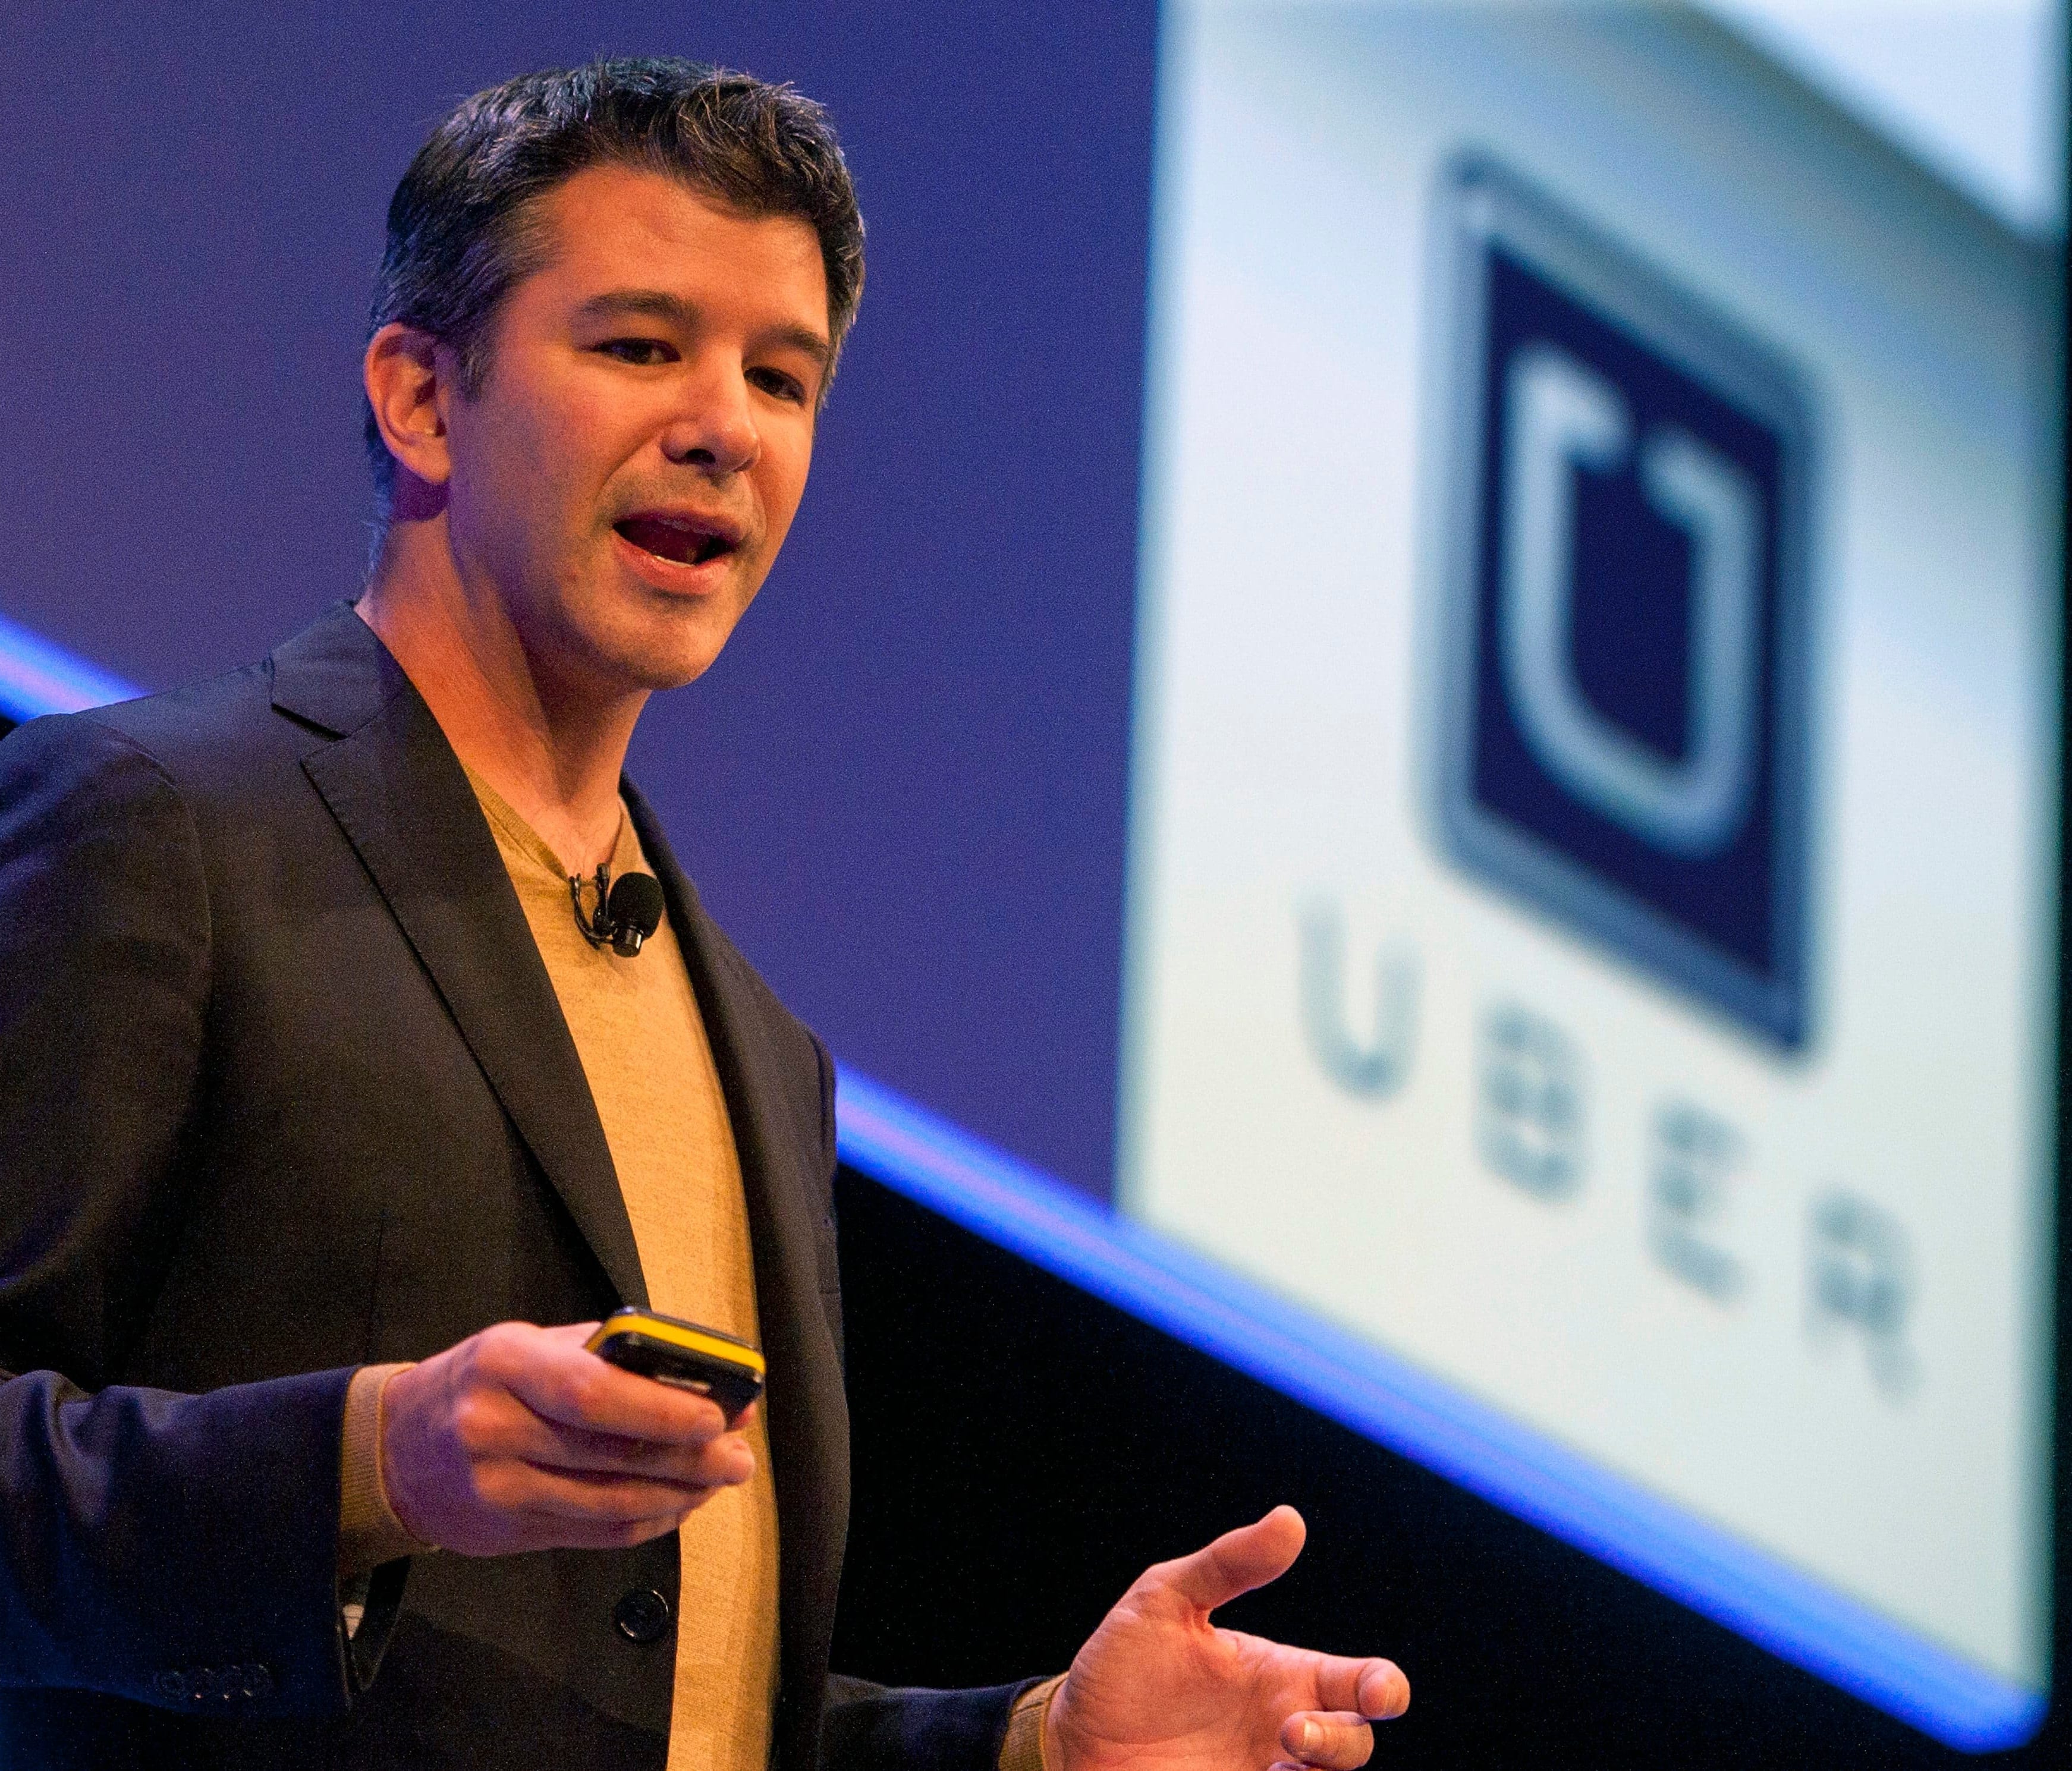 Travis Kalanick, Founder and CEO of Uber, delivers a speech at the Institute of Directors Convention at the Royal Albert Hall, Central London, Britain, on October 3, 2014.